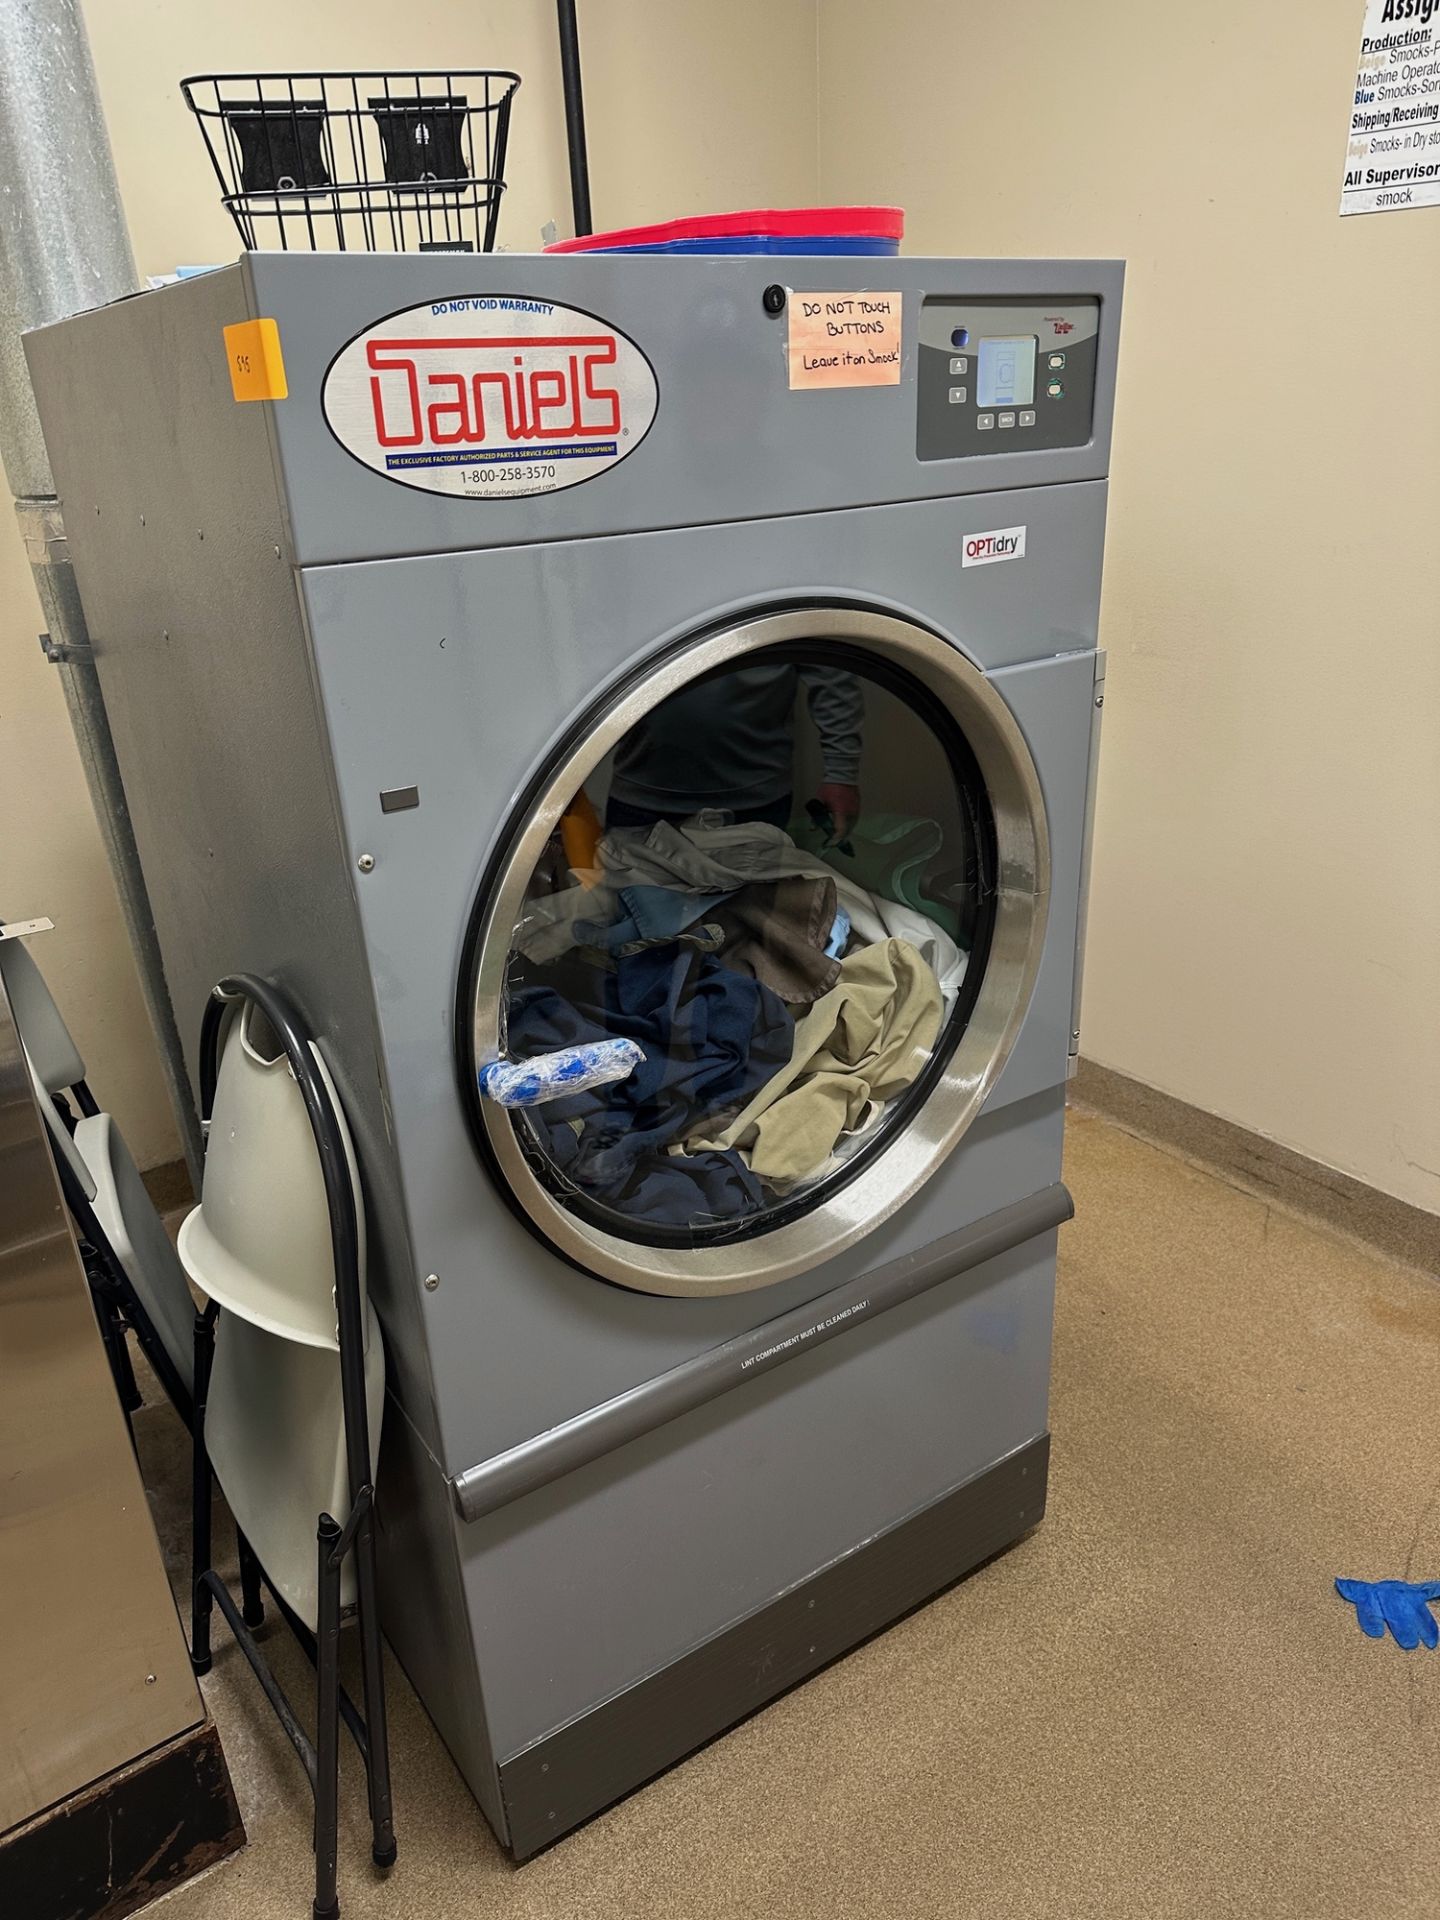 Daniels OptiDry Industrial Clothes Dryer & UniMac Industrial Clothes Washer | Rig Fee $200